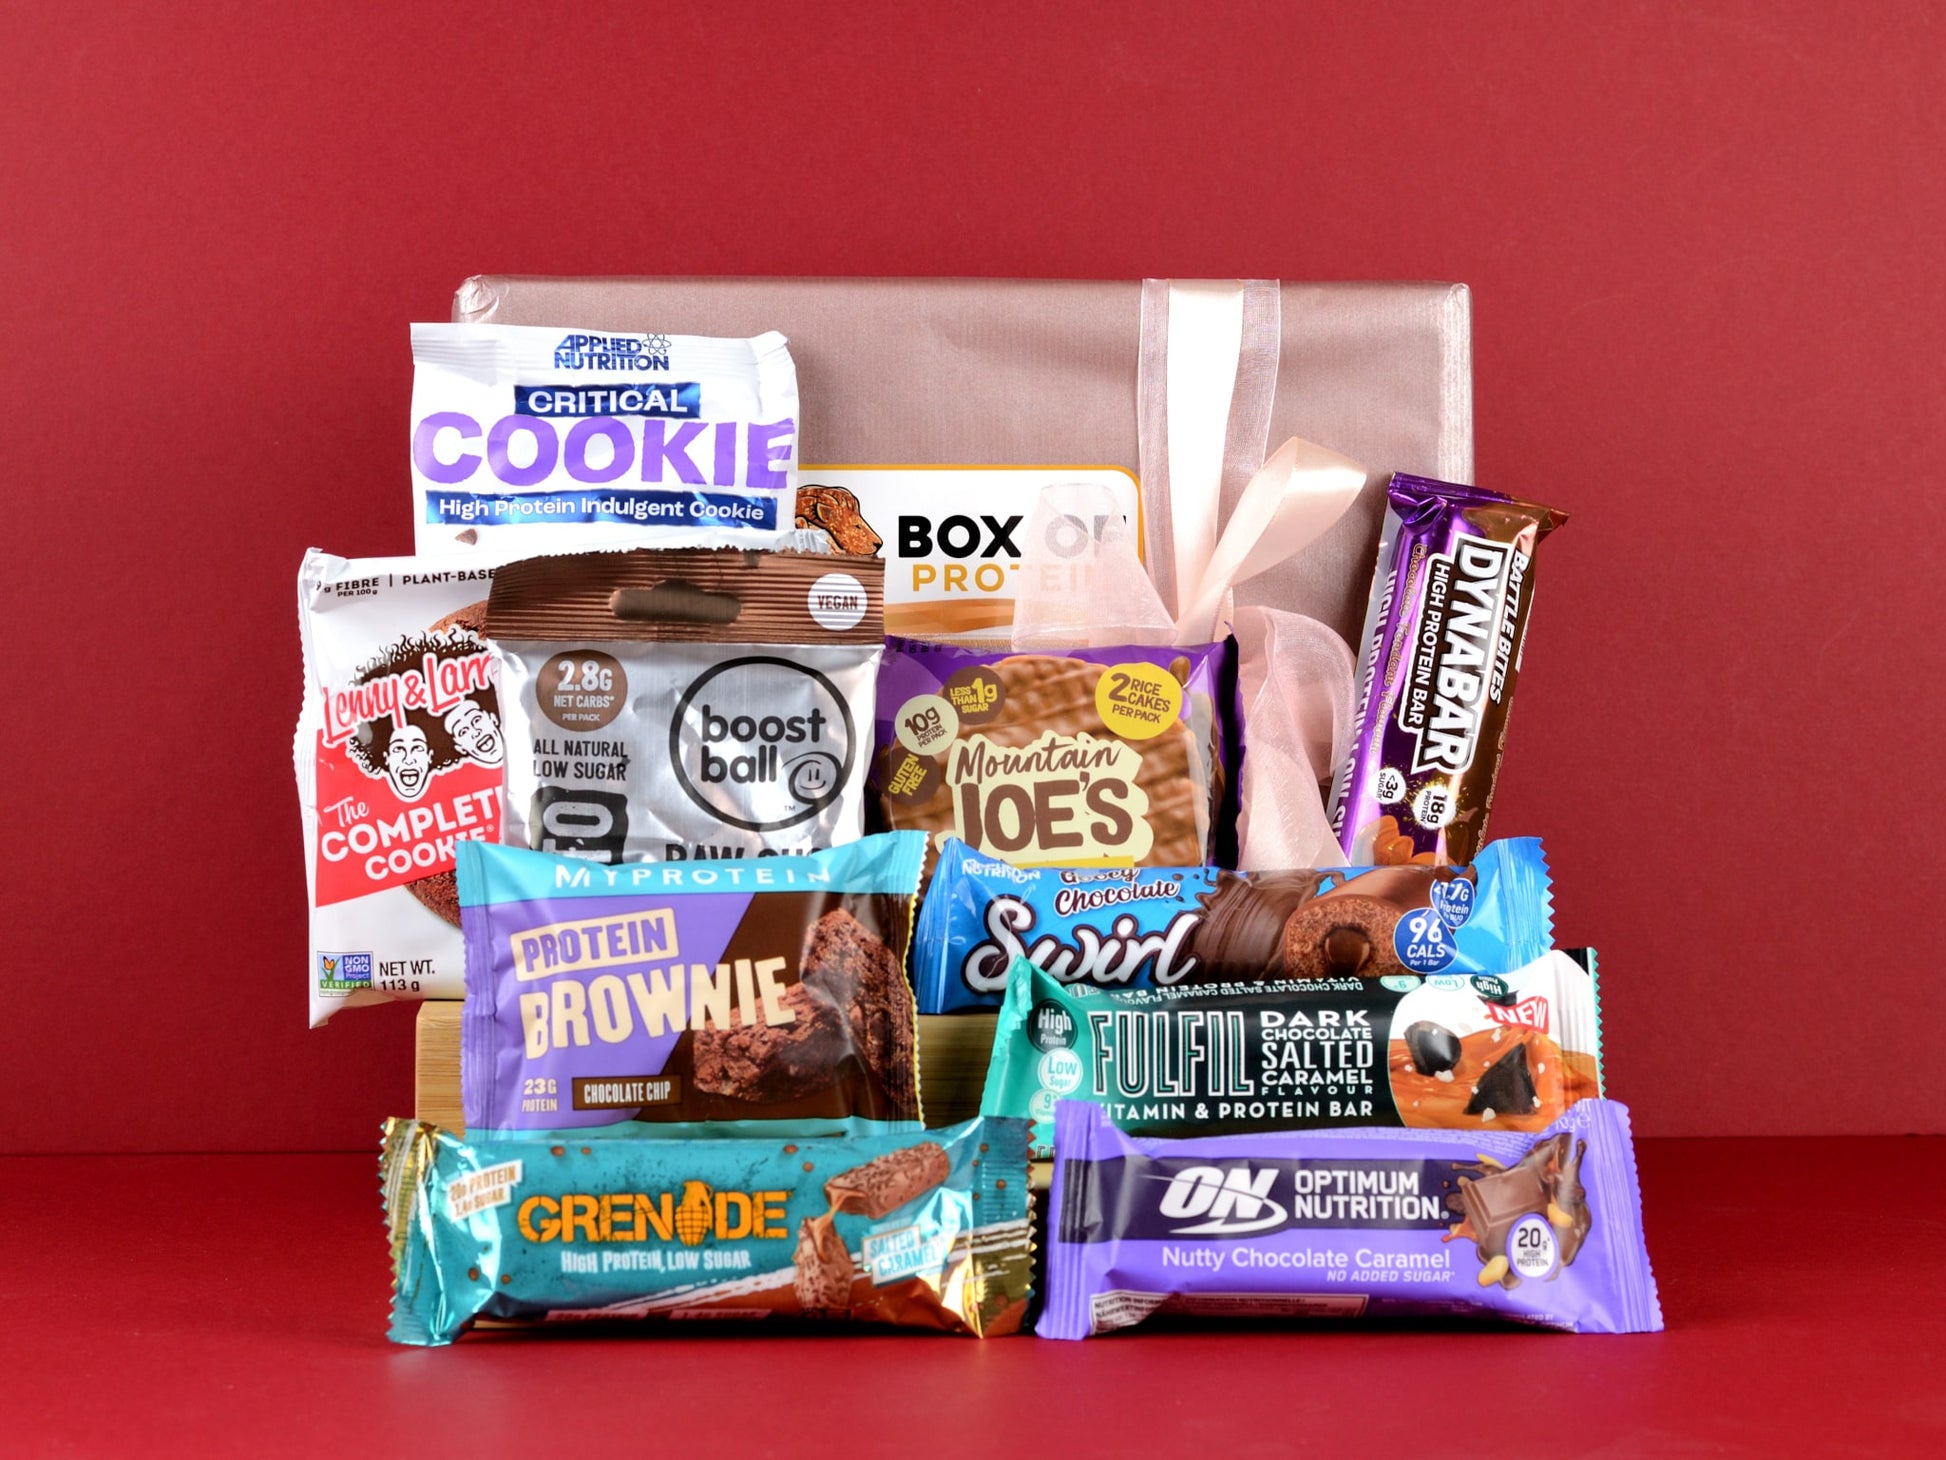 Box Of Protein | Protein Indulgence Chocolate Madness Box | Protein Snacks Hamper | Applied Nutrition, FUlfil, MyProtein, Grenade, Lenny & Larrys, Optimum Nutrition, Boostball, Battle Bites, Mountain Joe